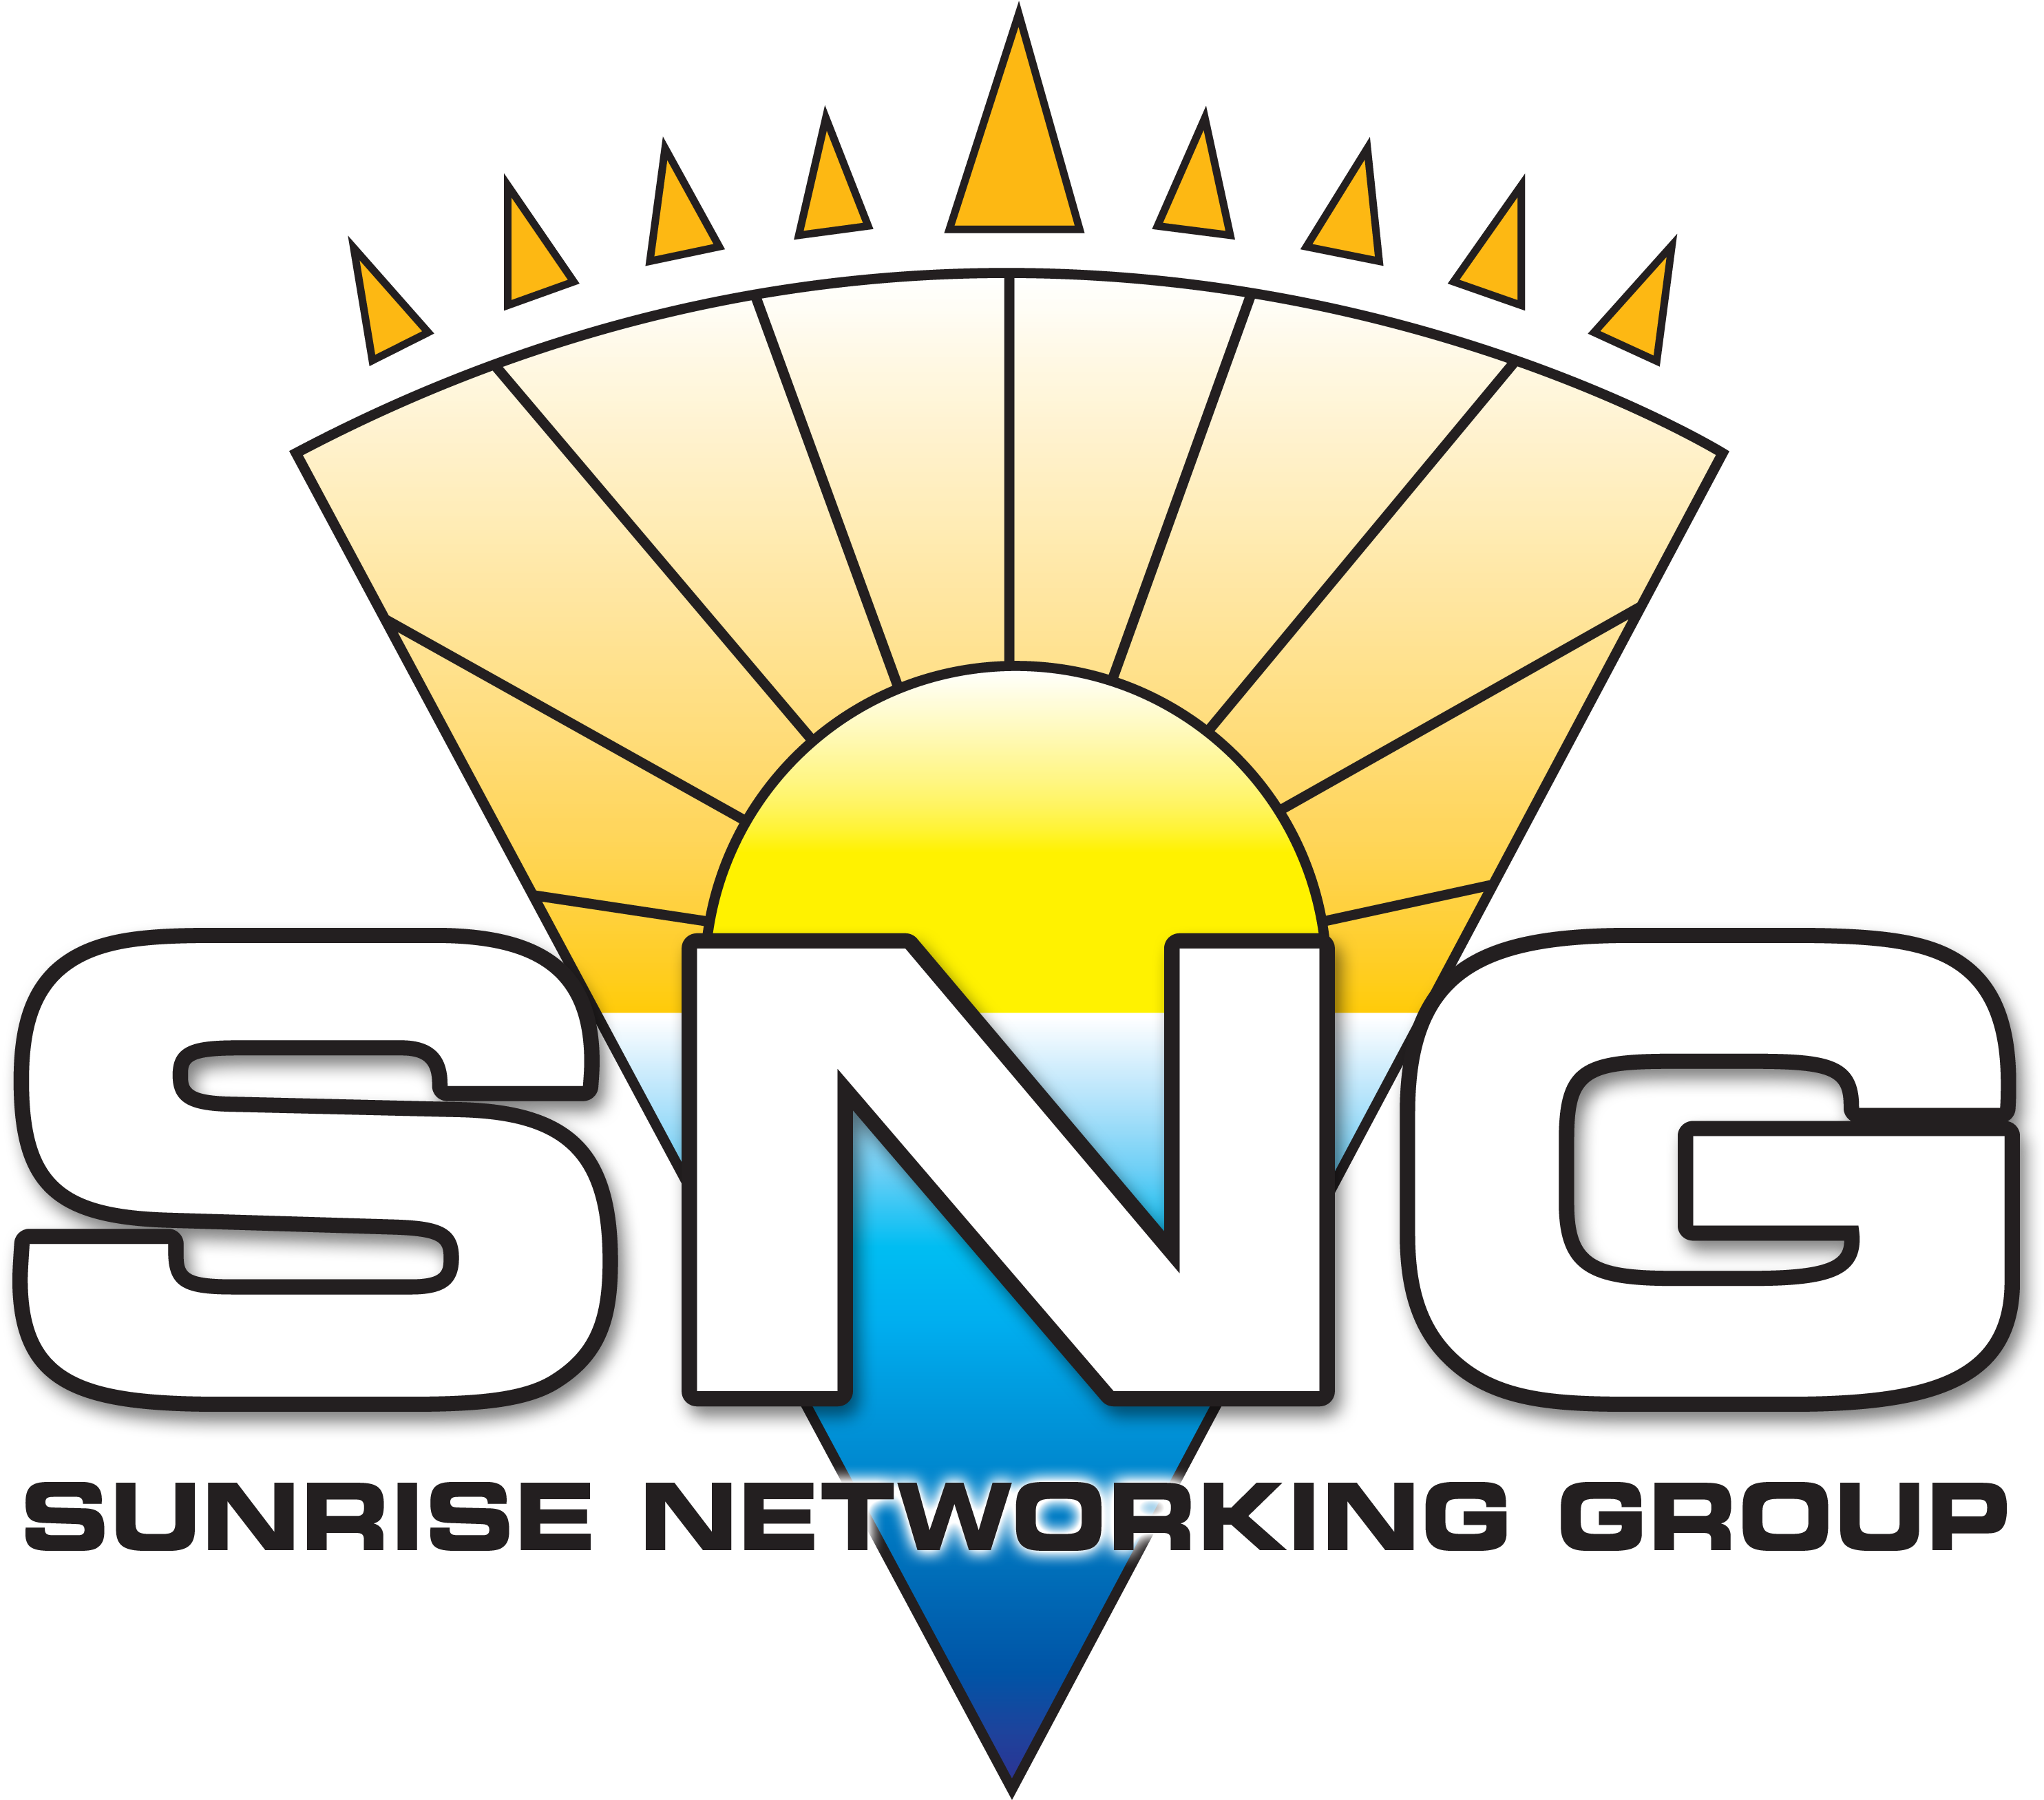 Sng Logo Stacked - Sunrise Networking Group, Llc (3000x3000)